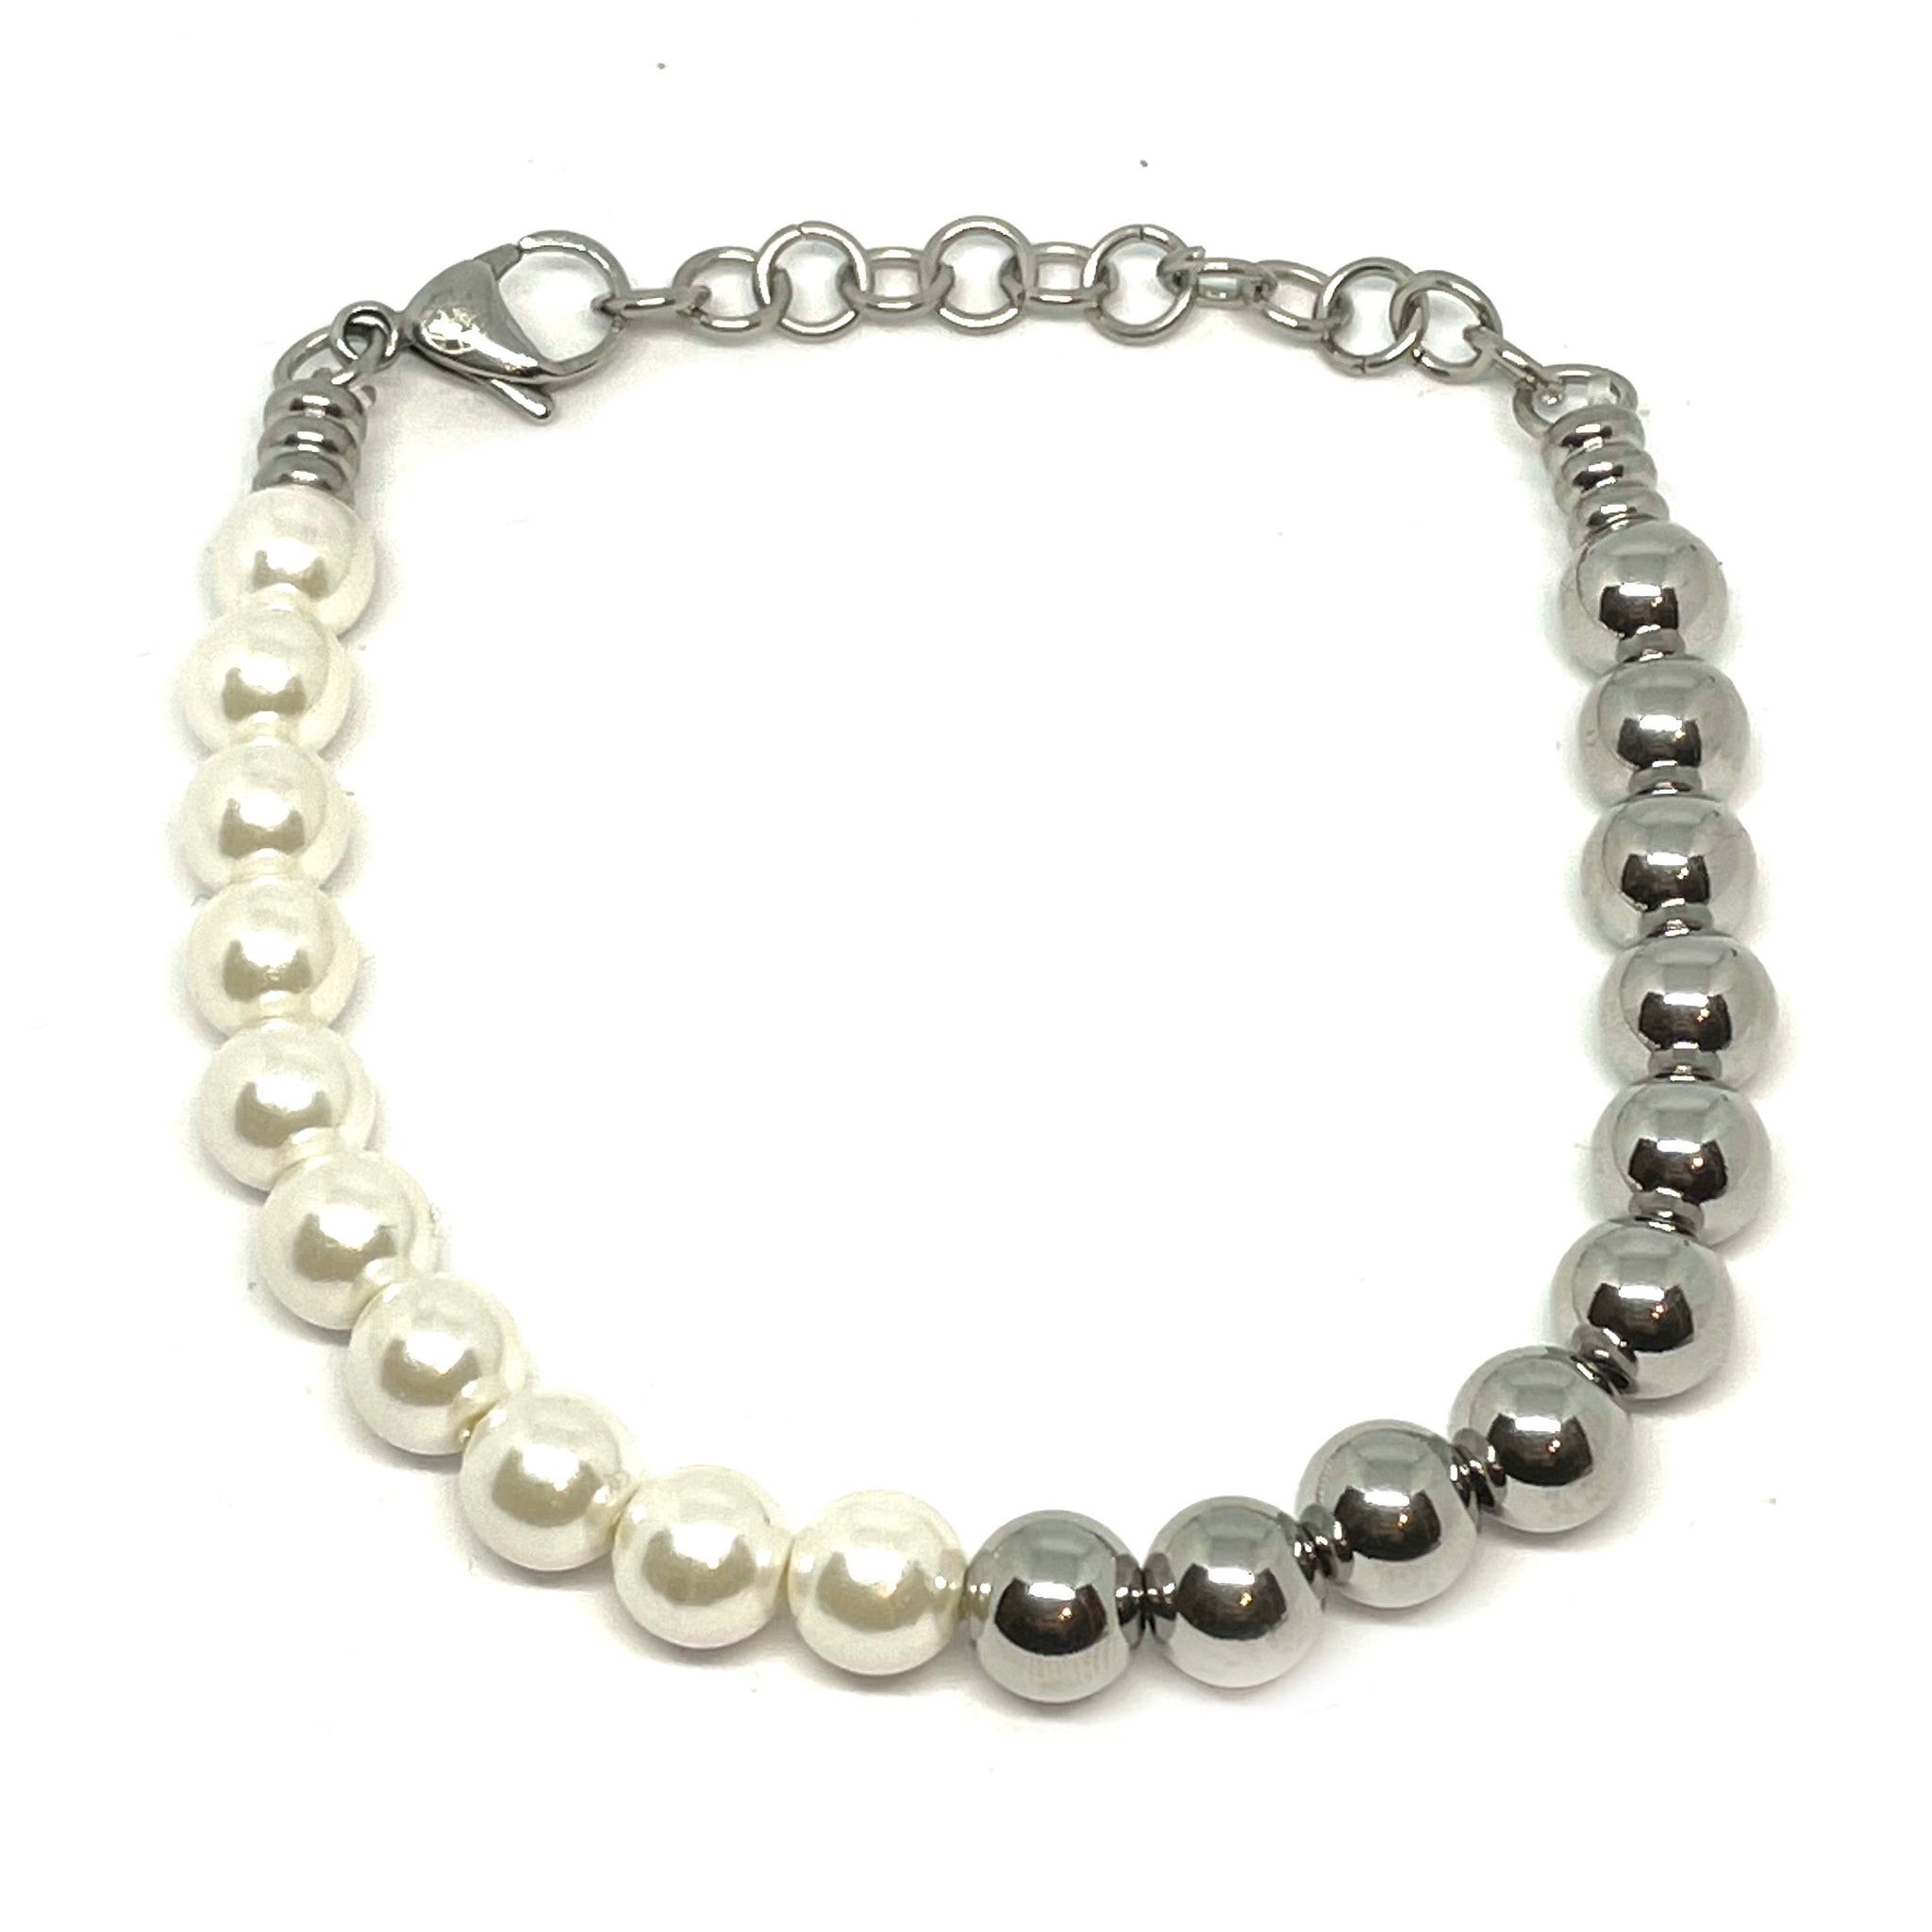 TWO-FACED PEARL BRACELET